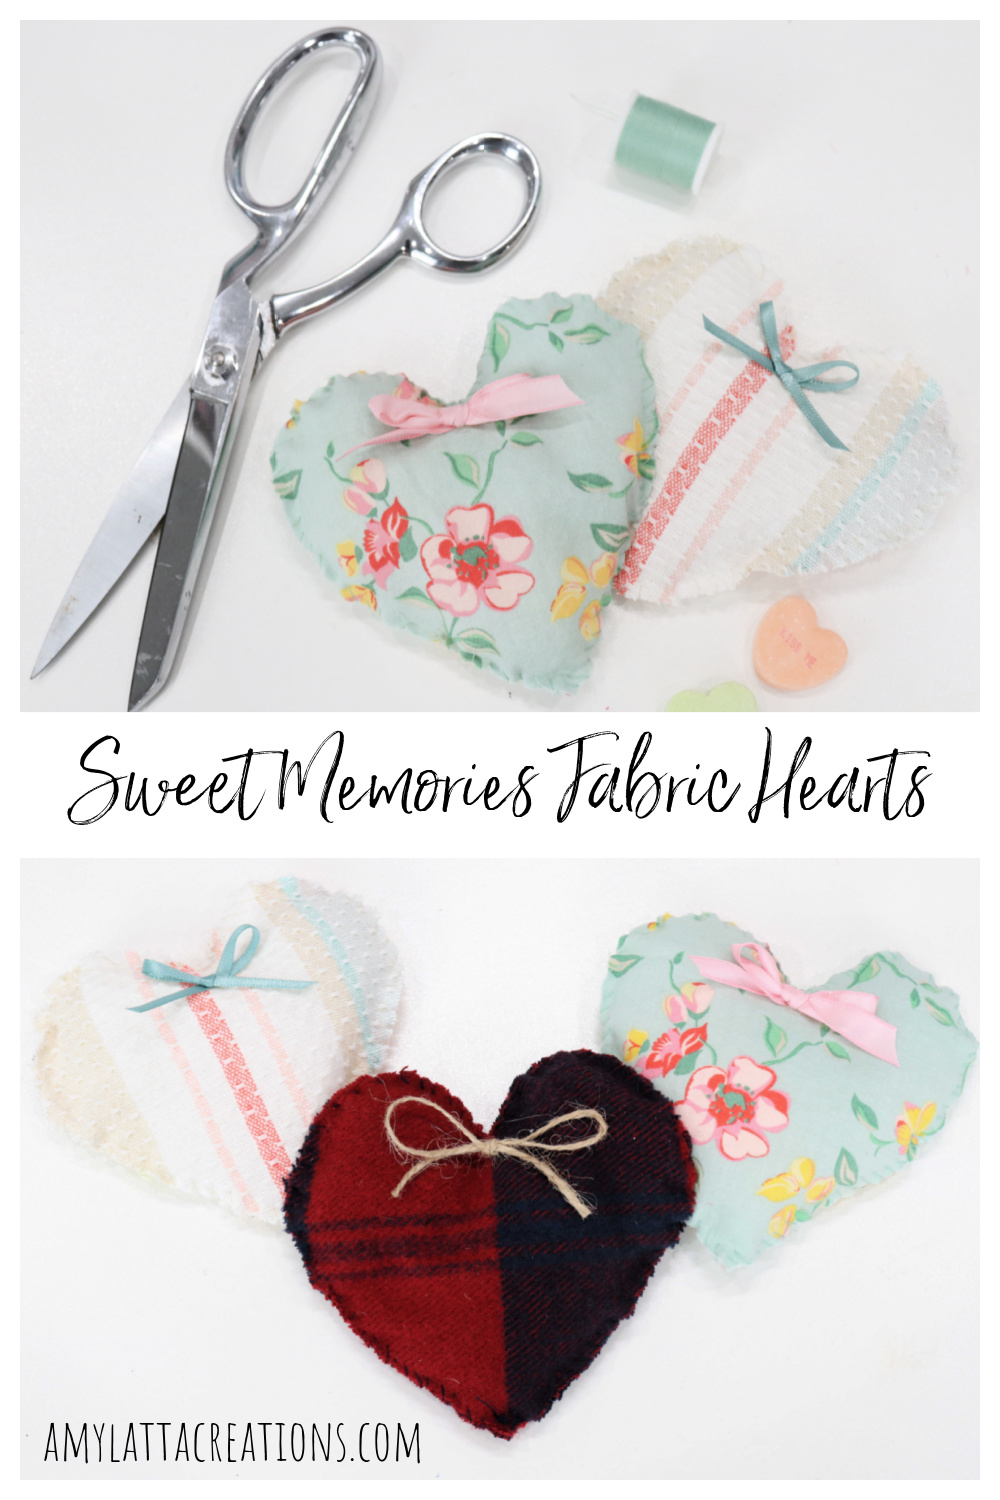 Image contains a collage of fabric hearts.